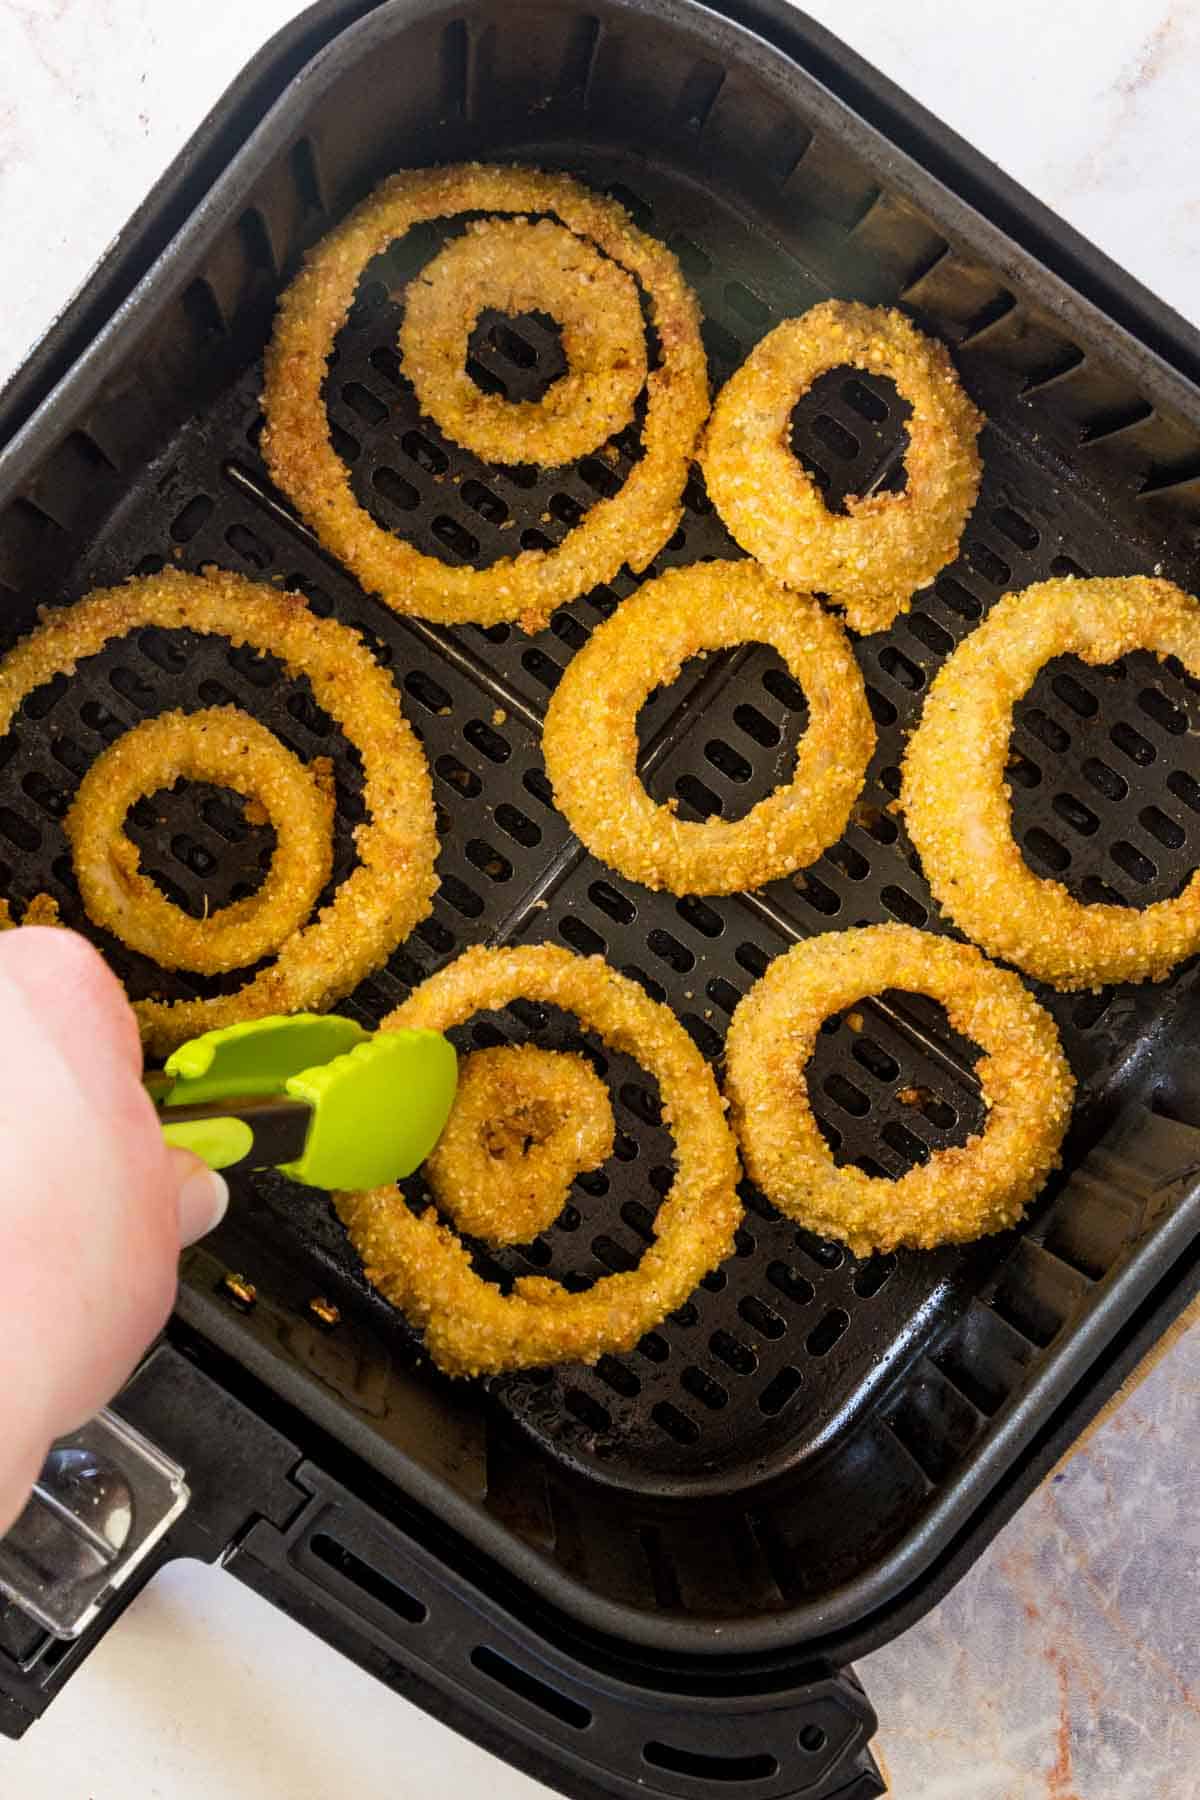 Crispy onion rings cooking in an air fryer.